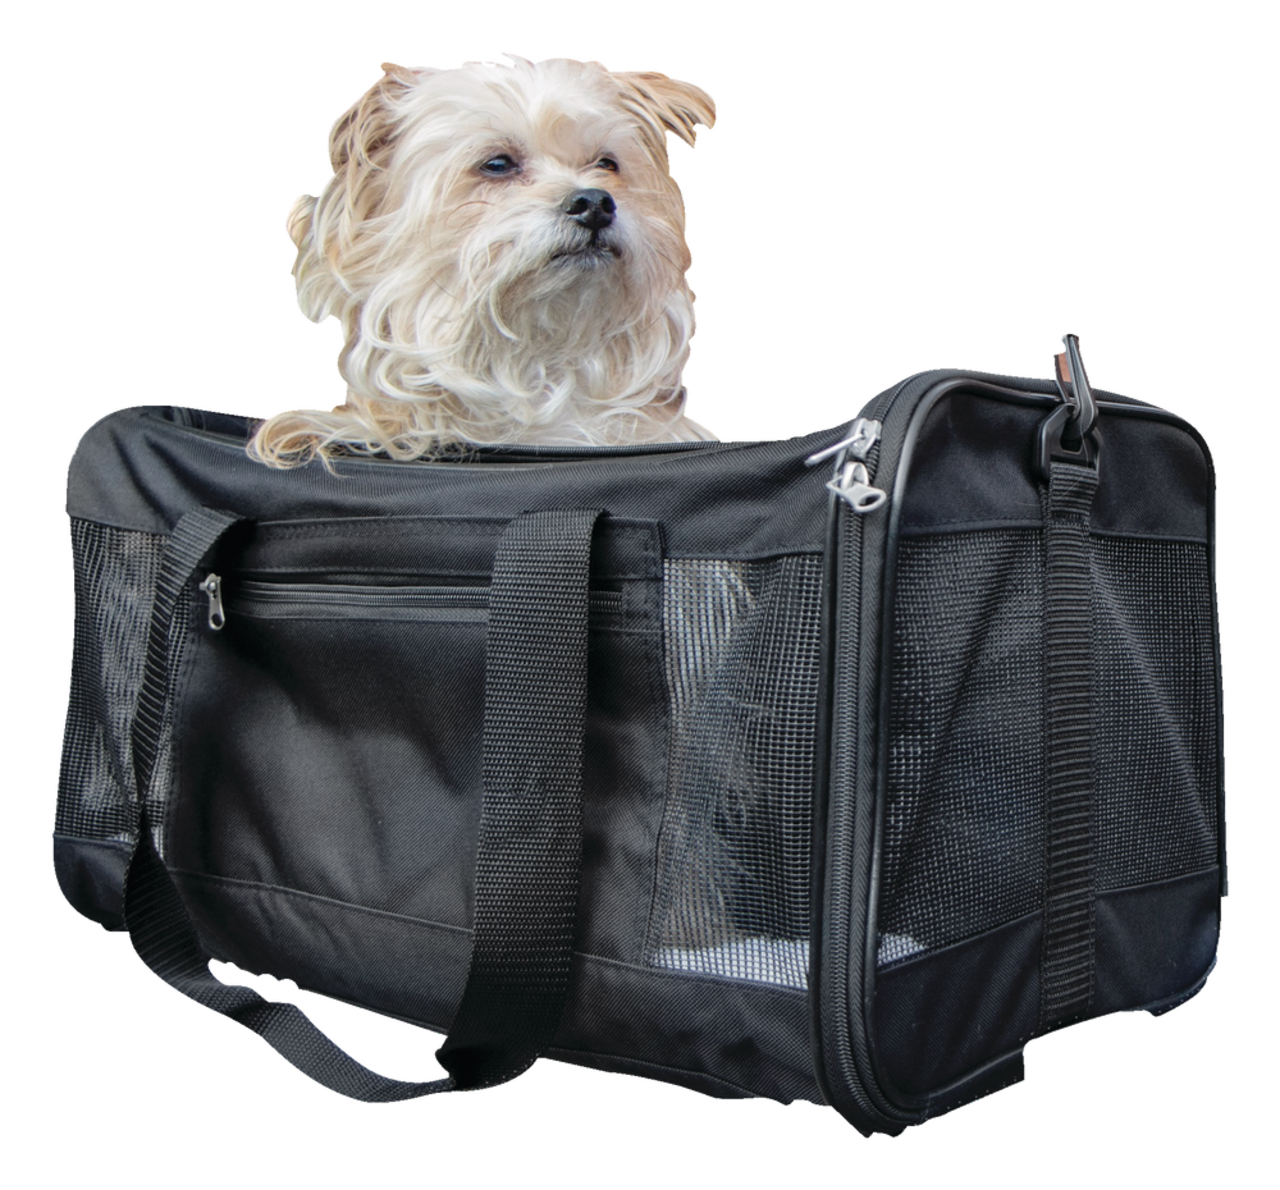 https://media-www.canadiantire.ca/product/living/pet-care/pet-accessories/1426157/trustypup-travel-easy-explorer-airline-approved-carrier-afabf0d0-d0f1-47db-b32d-7614d2d7b3b2.png?imdensity=1&imwidth=1244&impolicy=mZoom